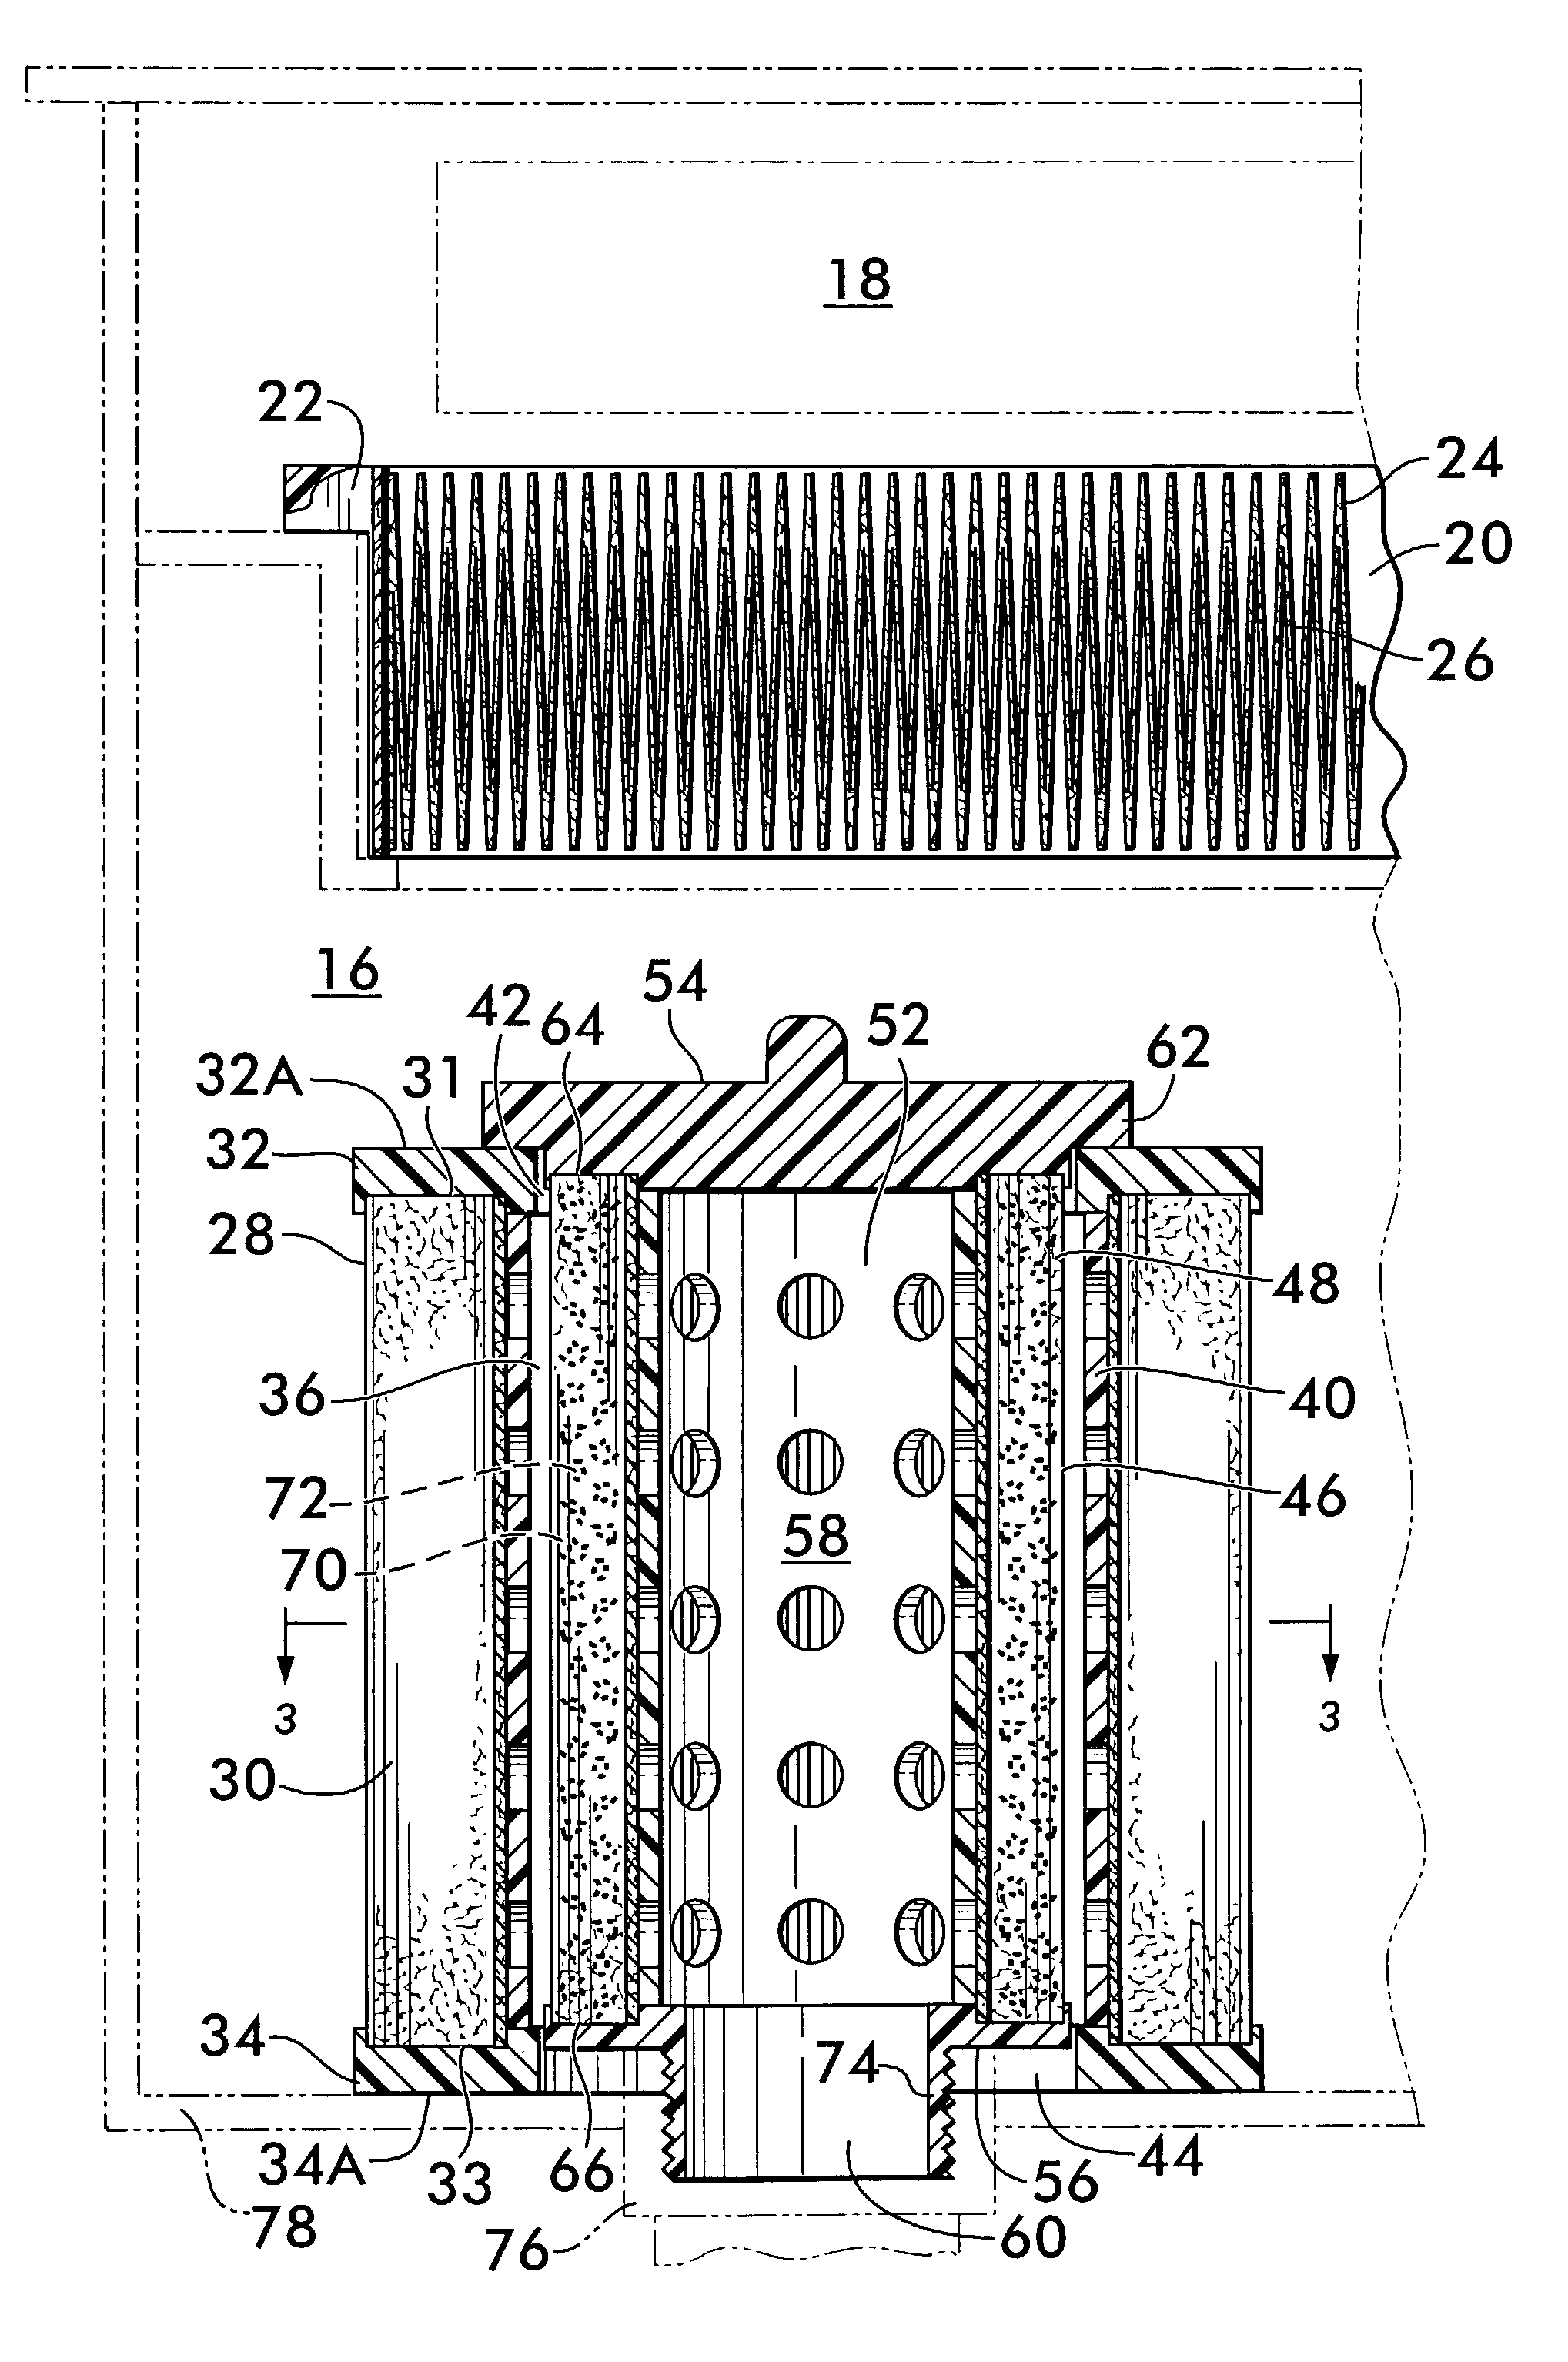 Fluid filter system with secondary flow path for augmented filtration